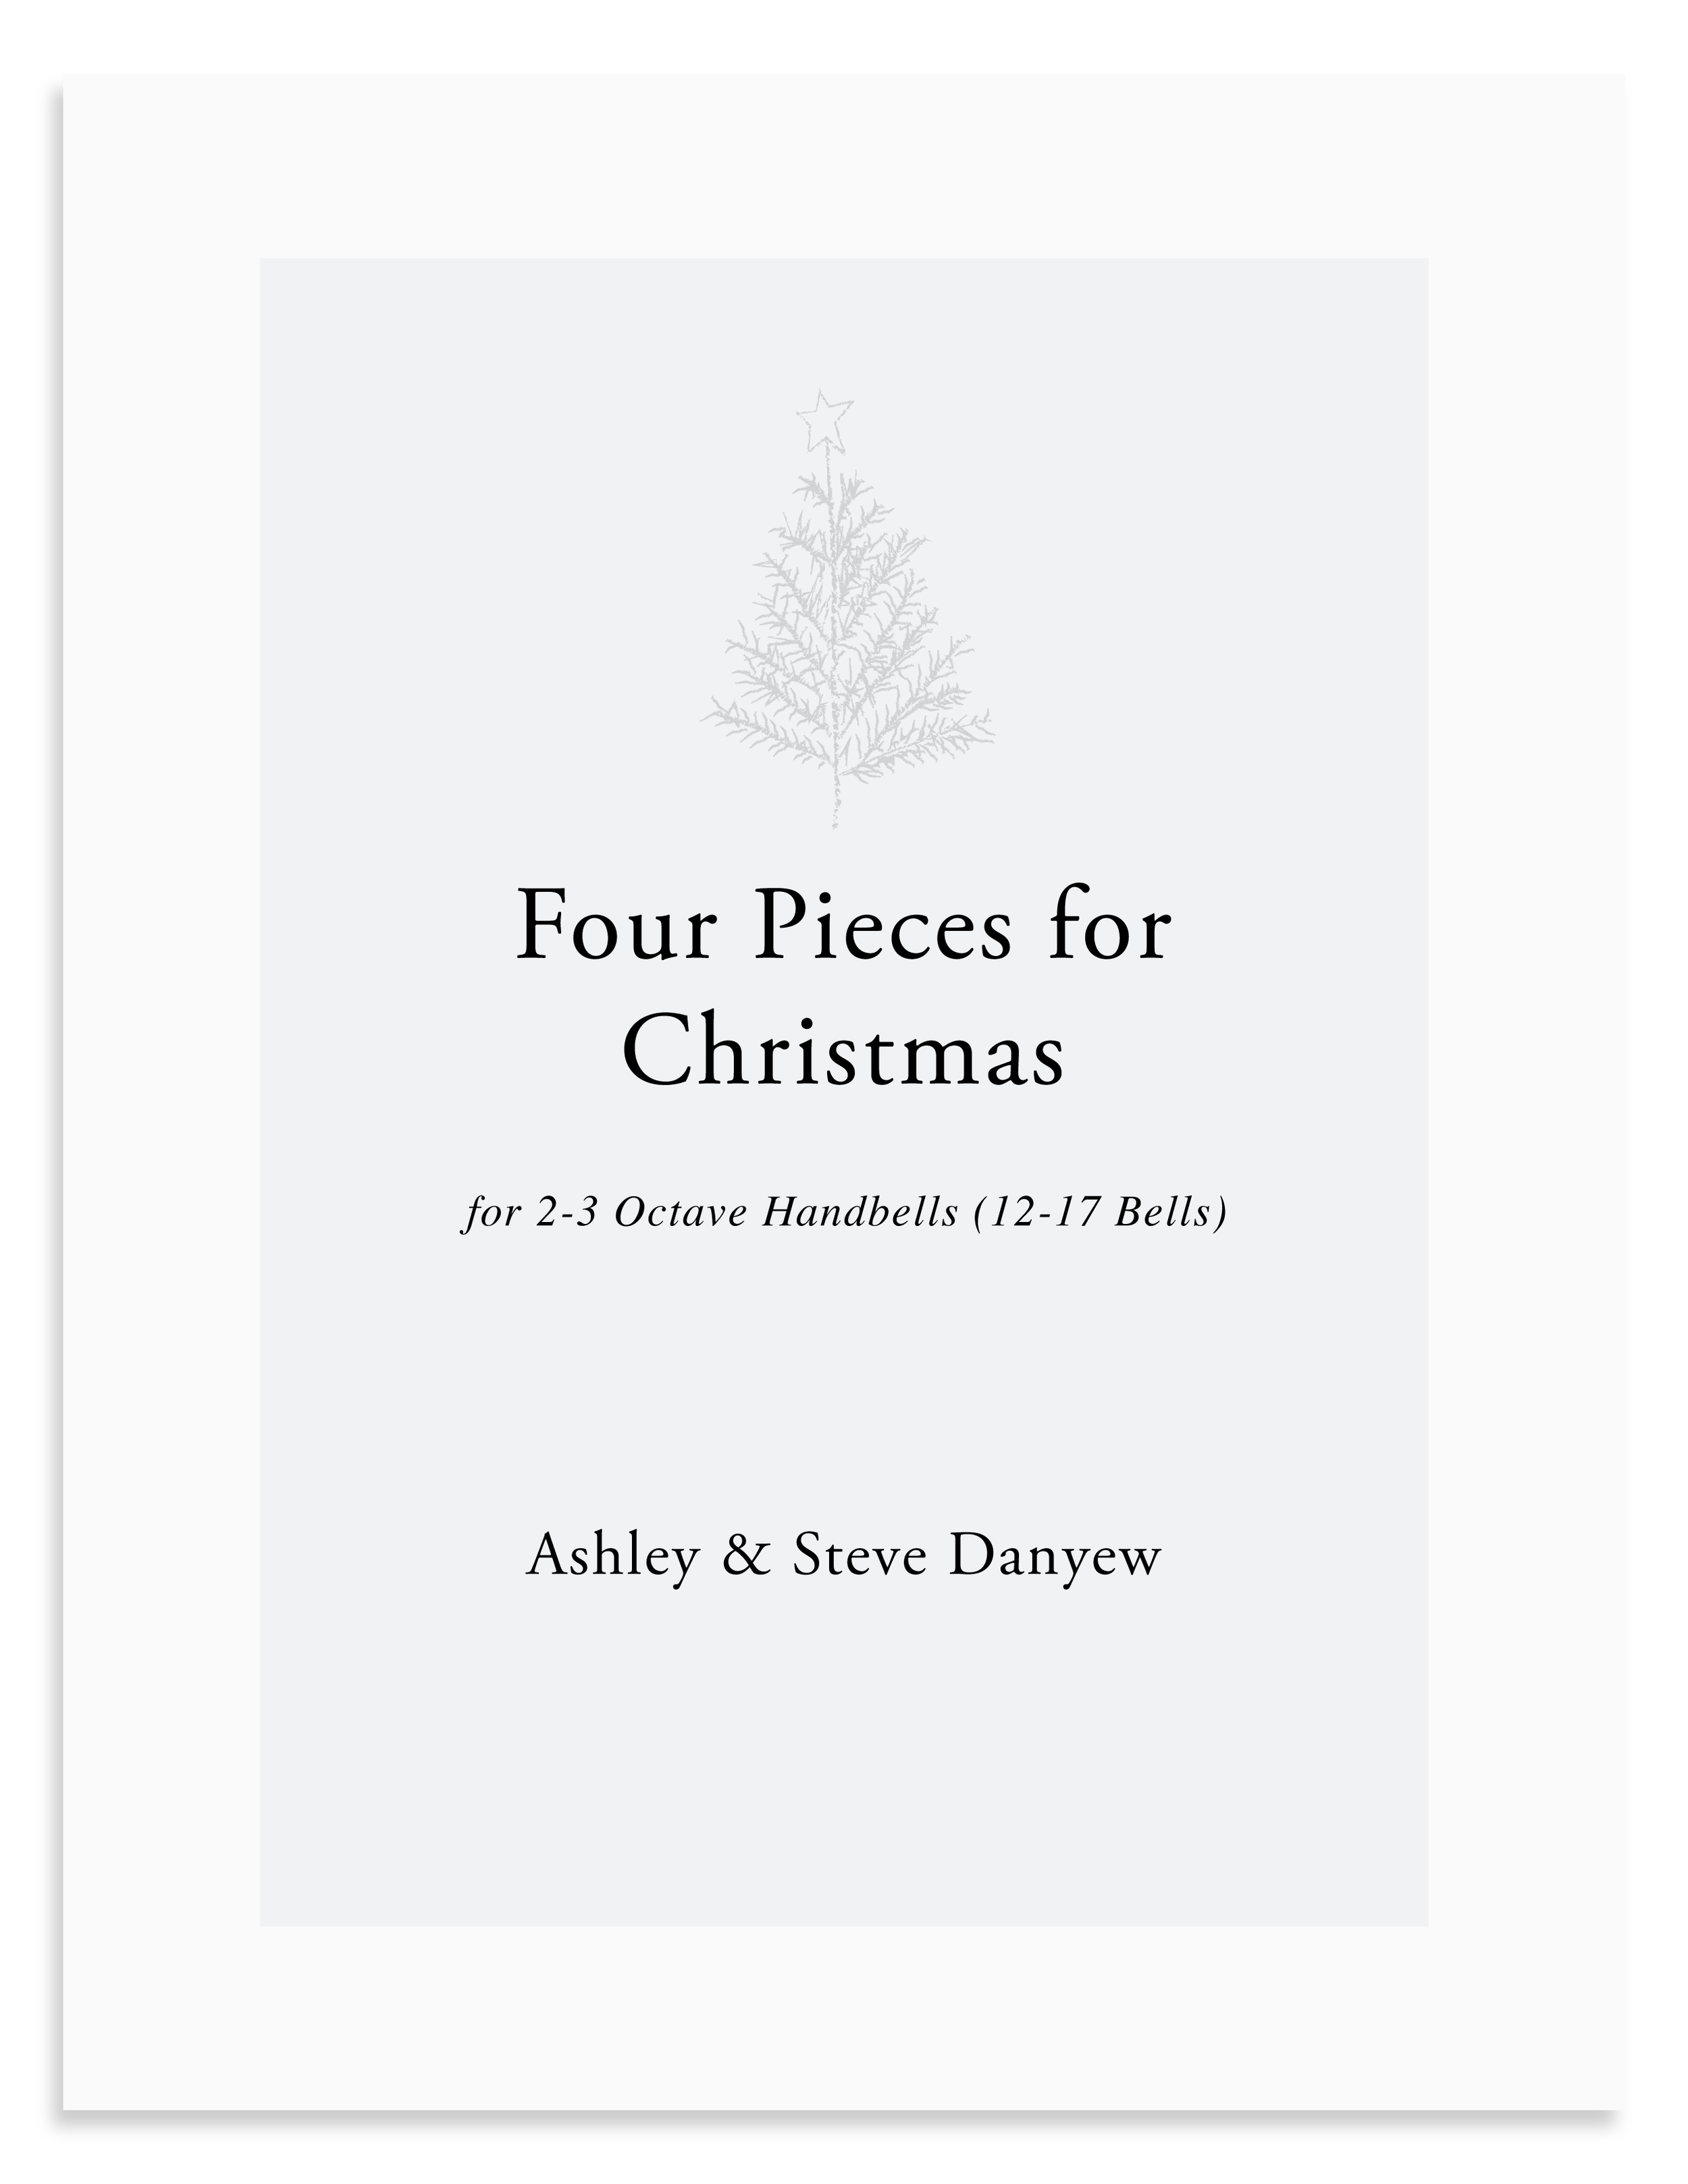 Four Pieces for Christmas: A New Handbell Collection for 2-3 Octave Handbells (12-17 Bells)